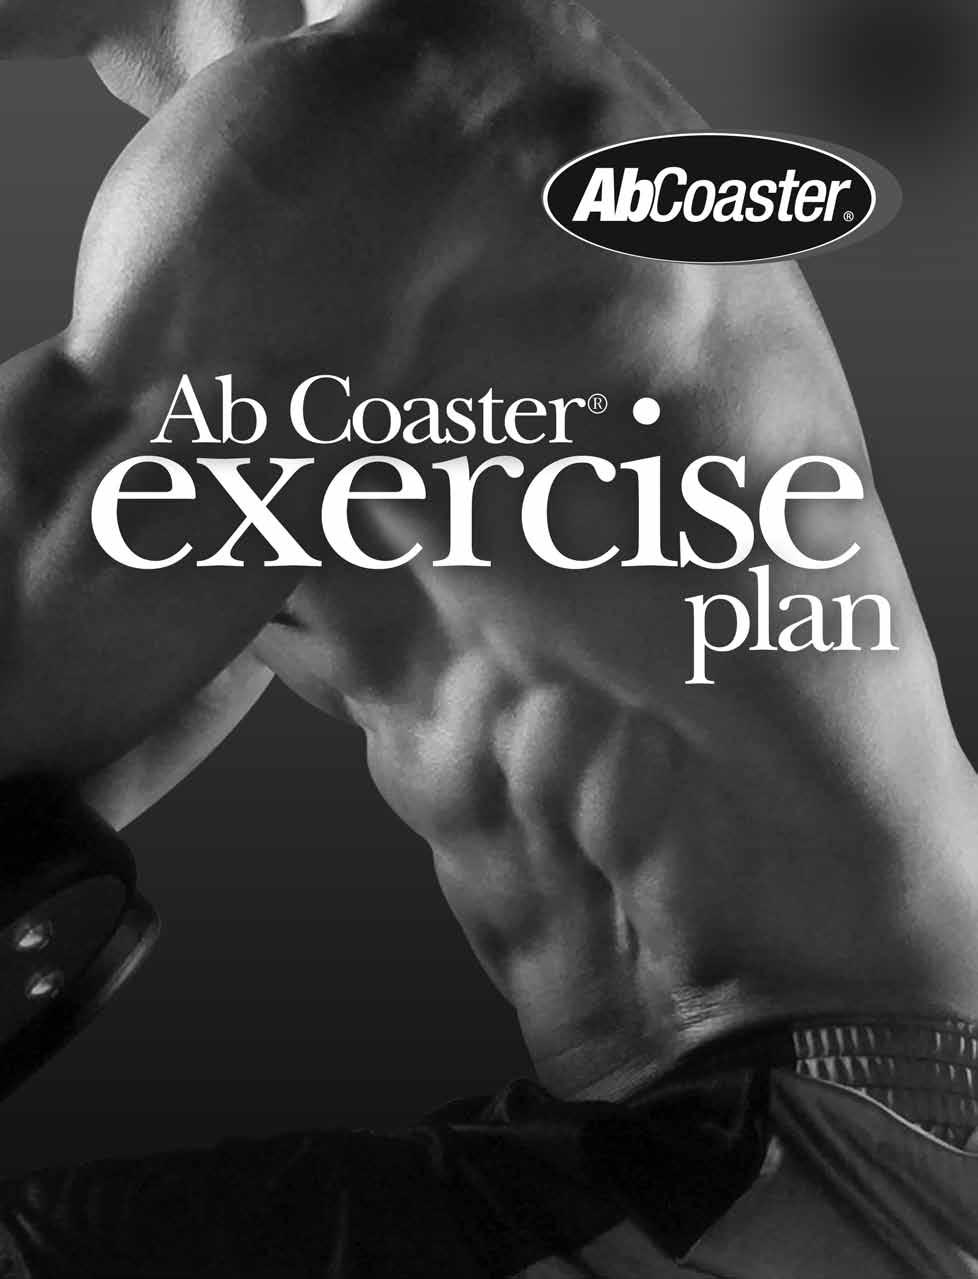 The Ab Coaster Workout DVD The Ab Coaster Workout DVD contains: the Ab Coaster Workout Program, which is a comprehensive